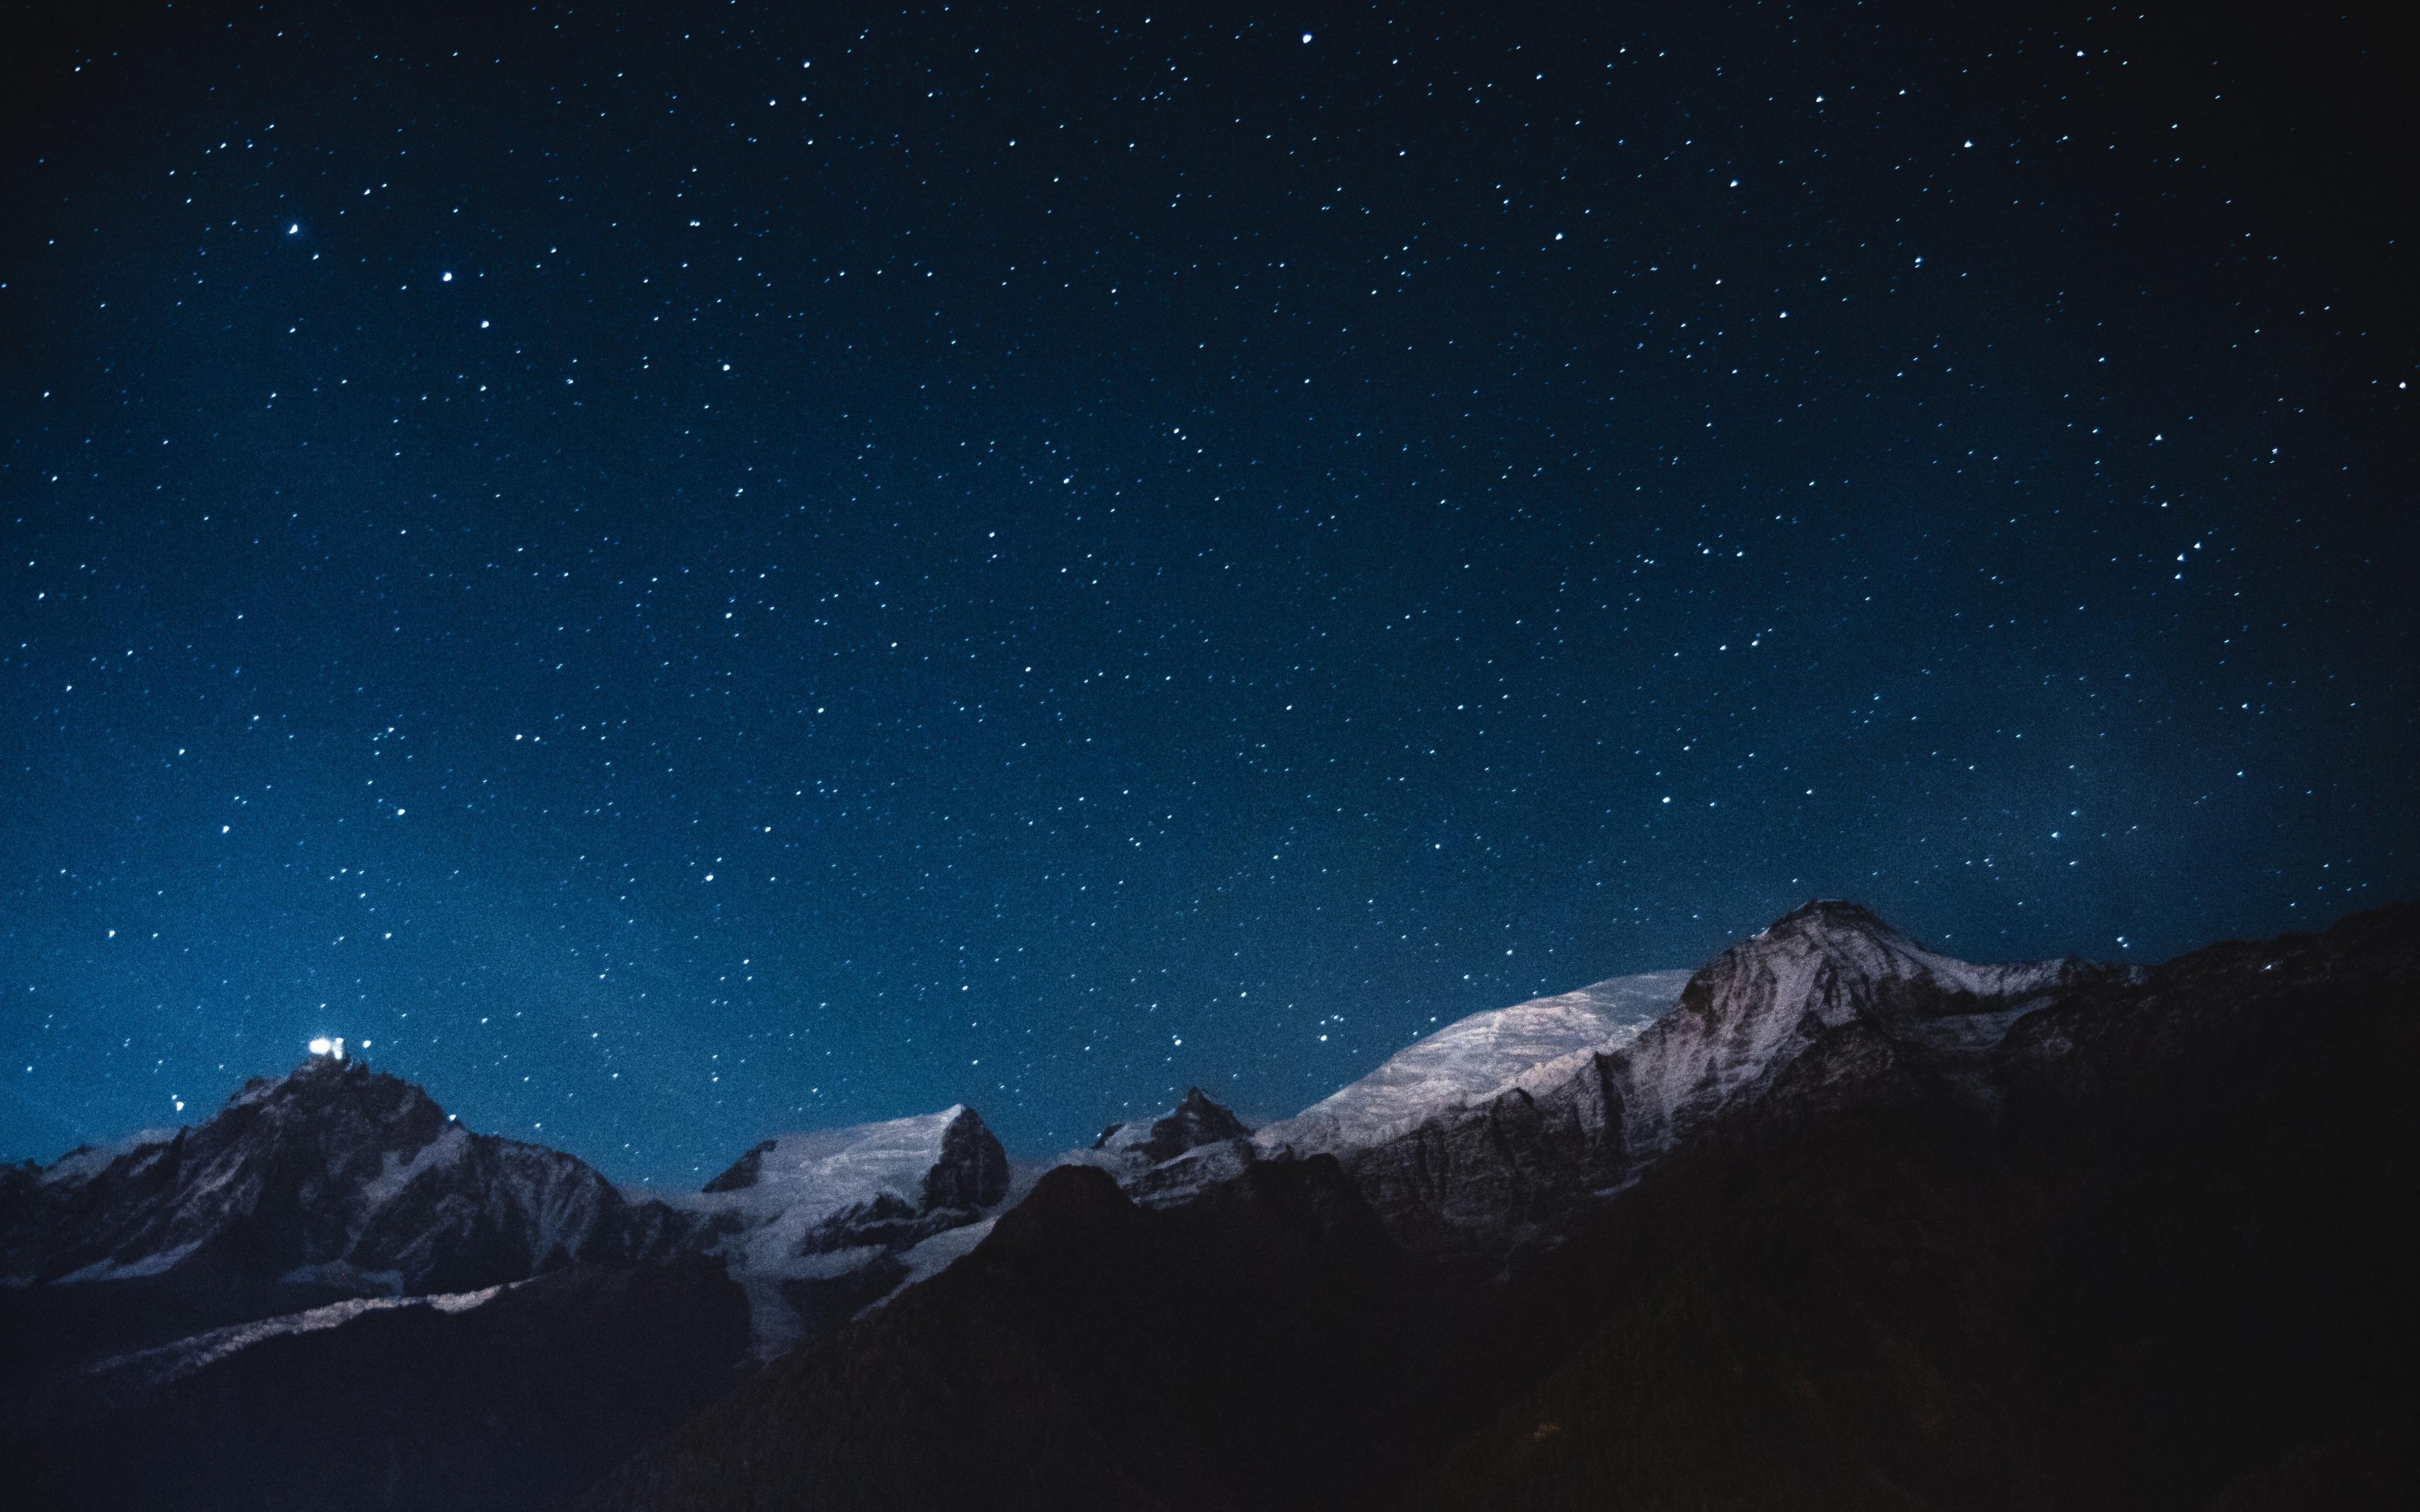 Download 3840x2400 wallpaper night, mountains, stars, nature, sky, 4k, ultra HD 16: widescreen, 3840x2400 HD image, background, 3556